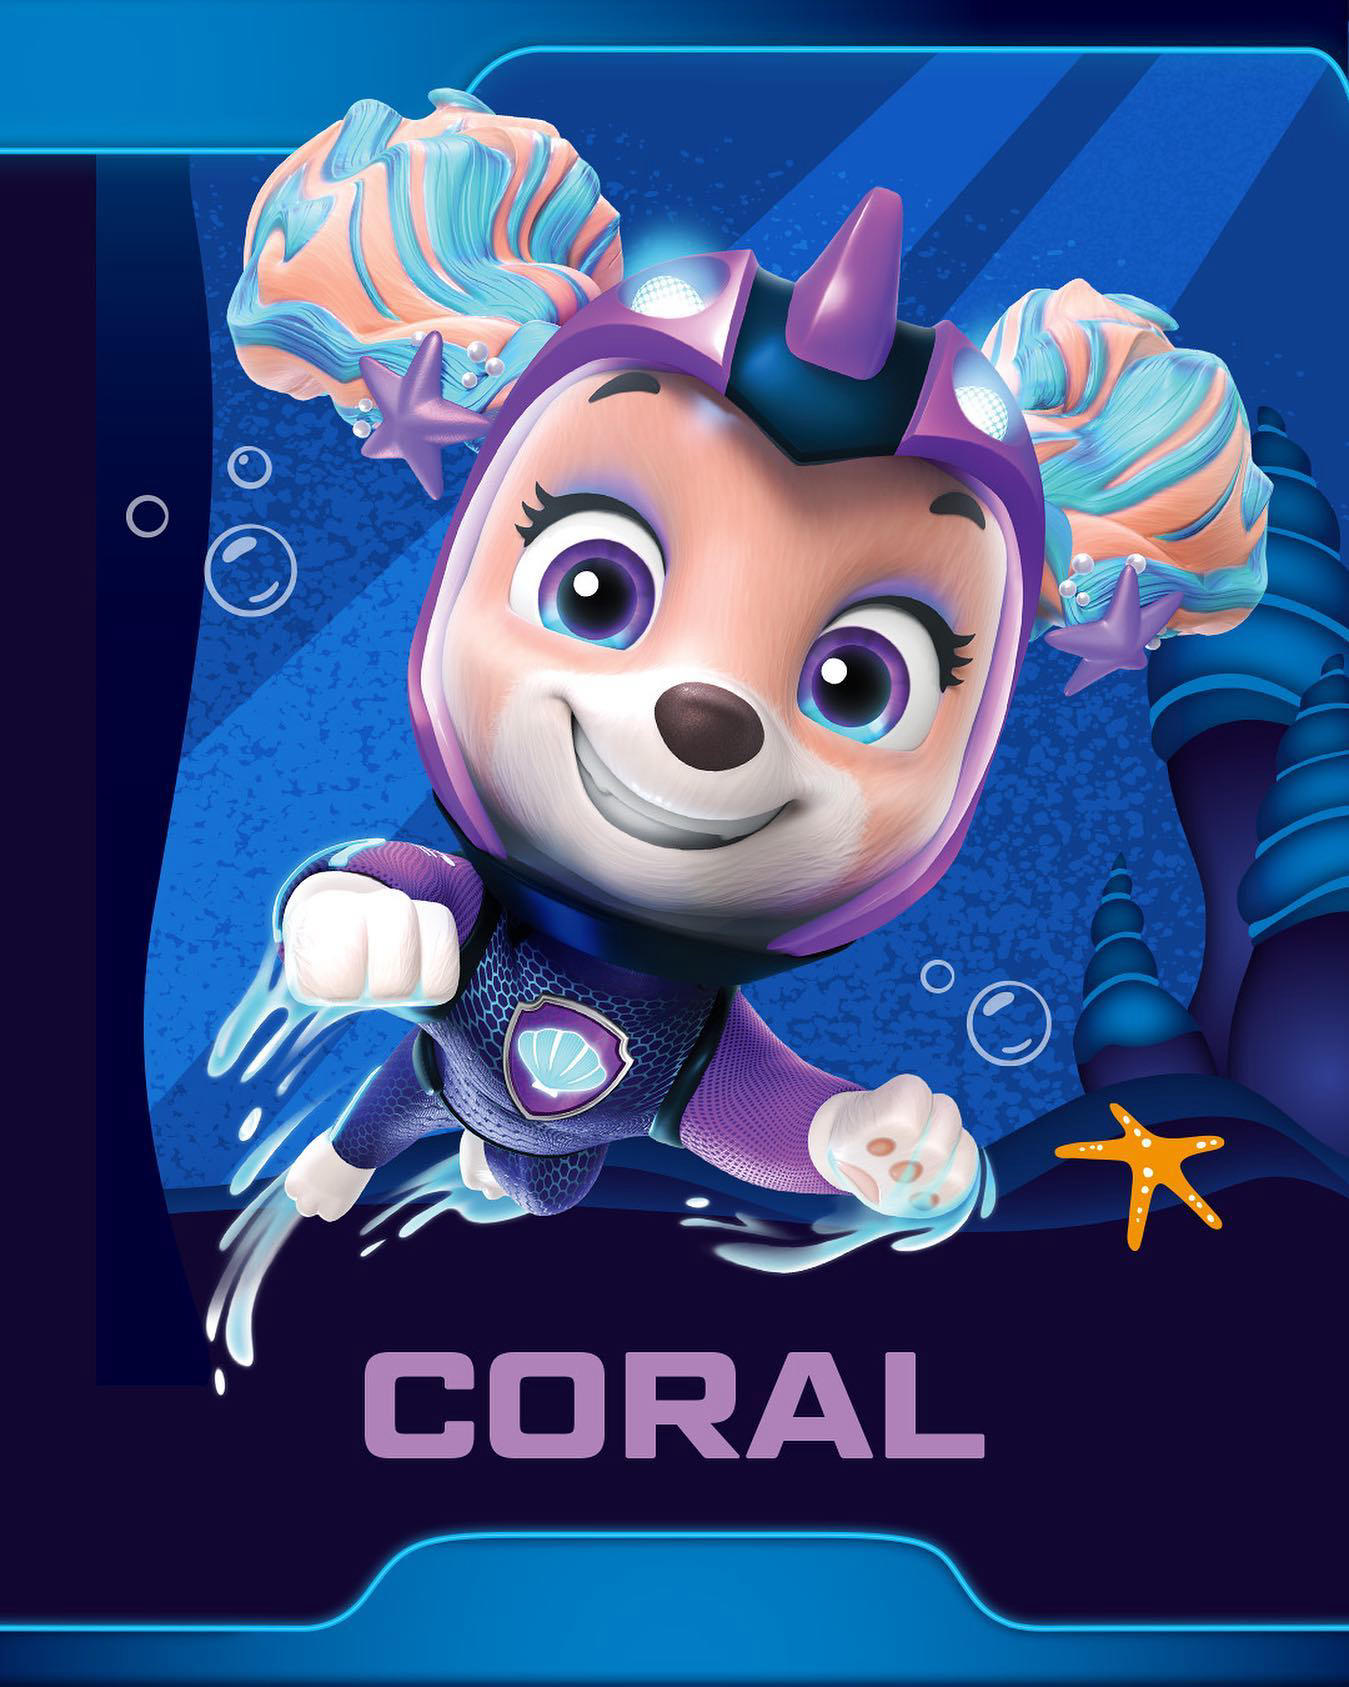 Meet our new friend Coral